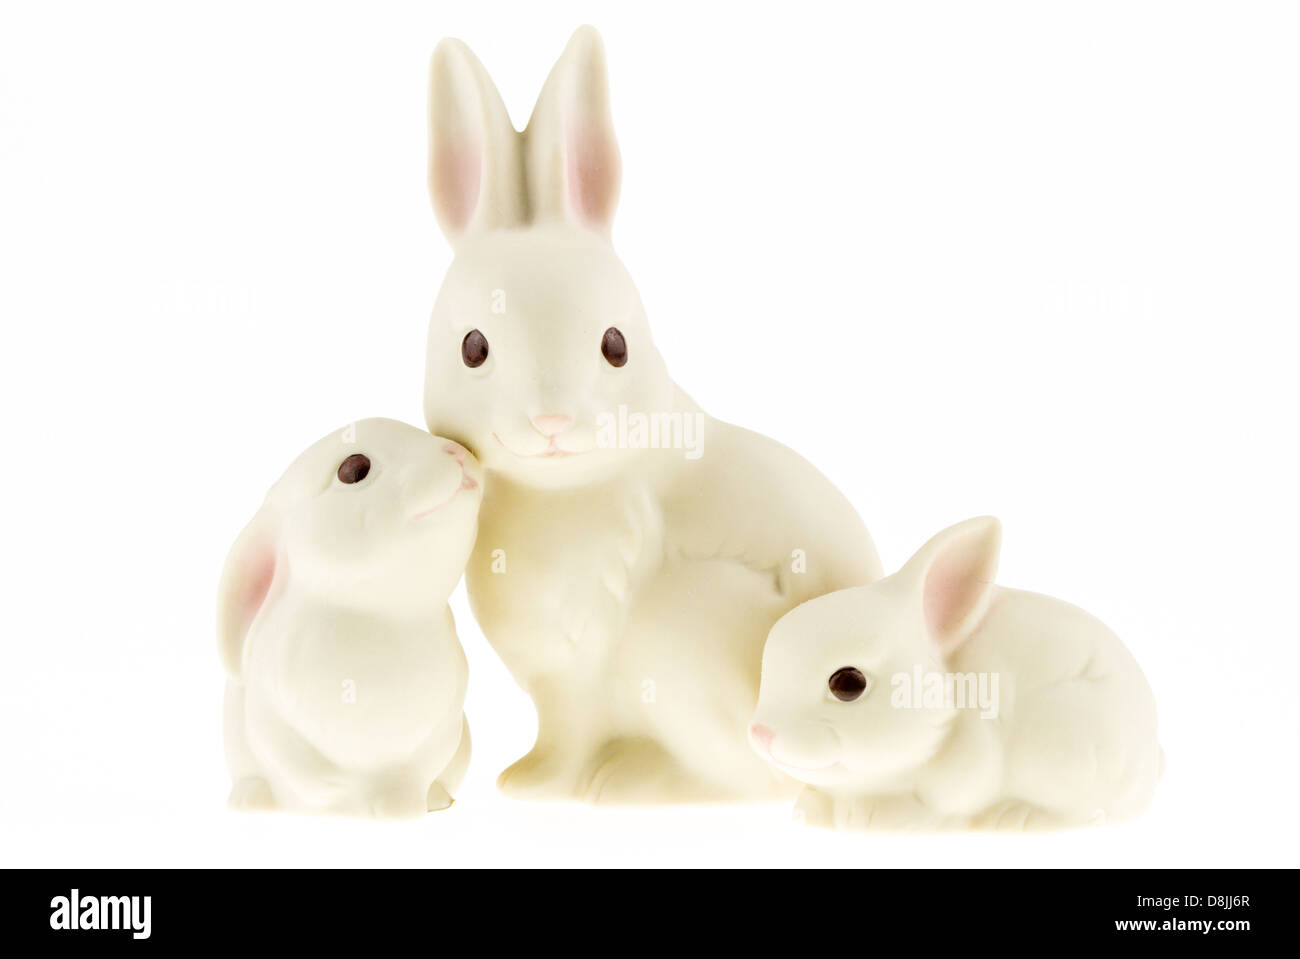 Three ceramic bunnies isolated on a white background. Stock Photo